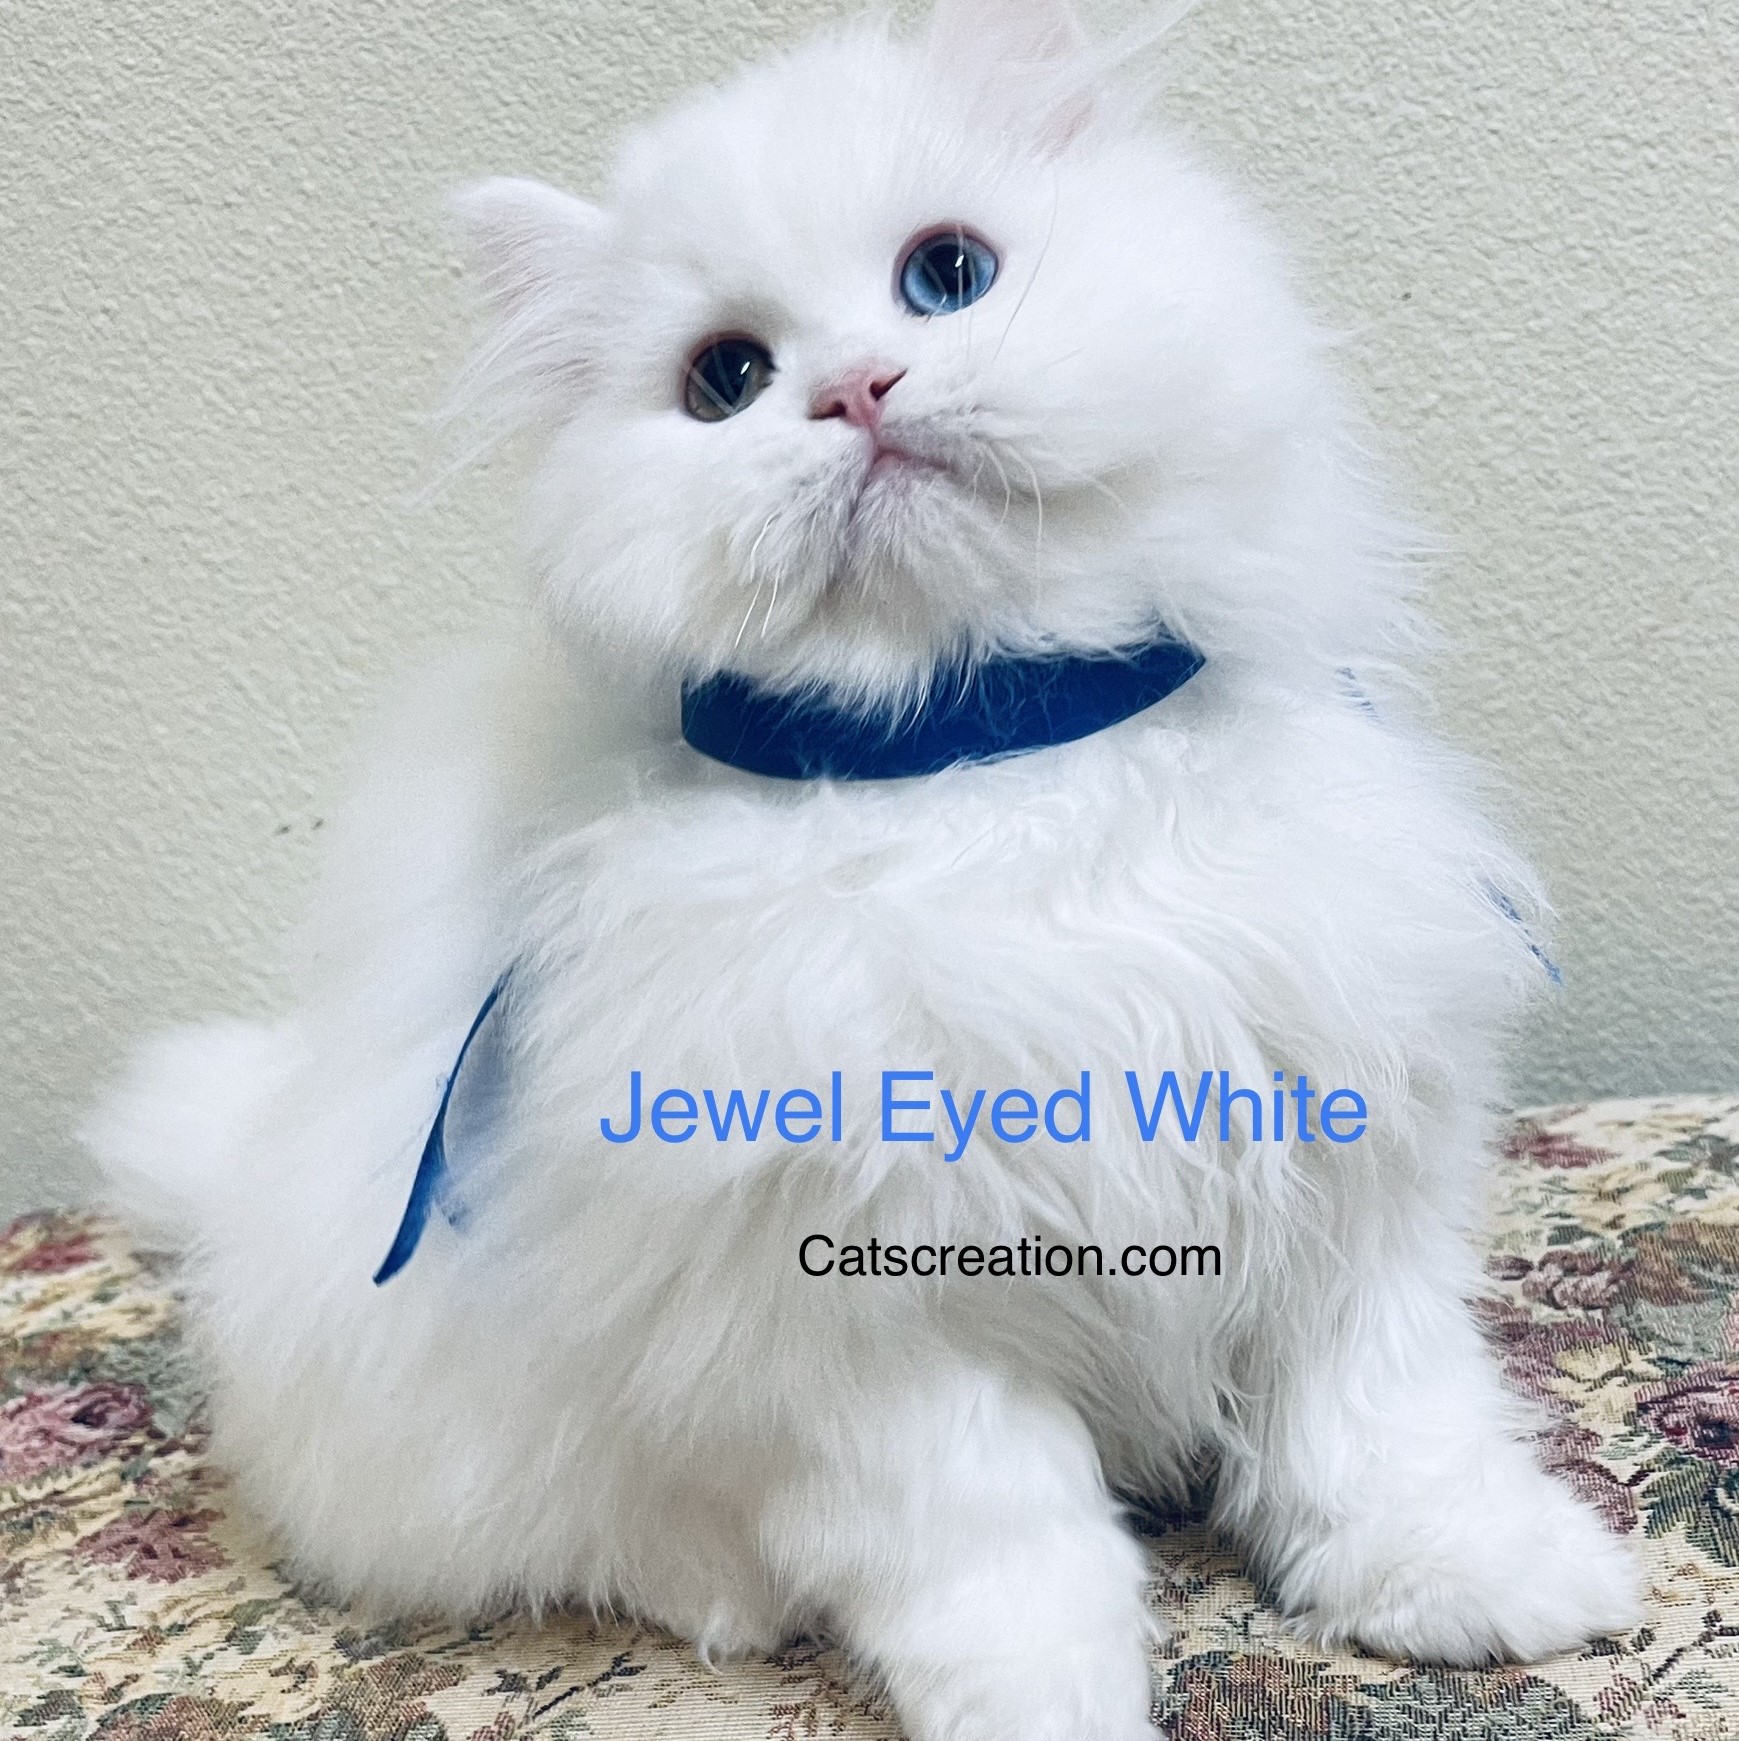 Available Teacup Persian Kittens